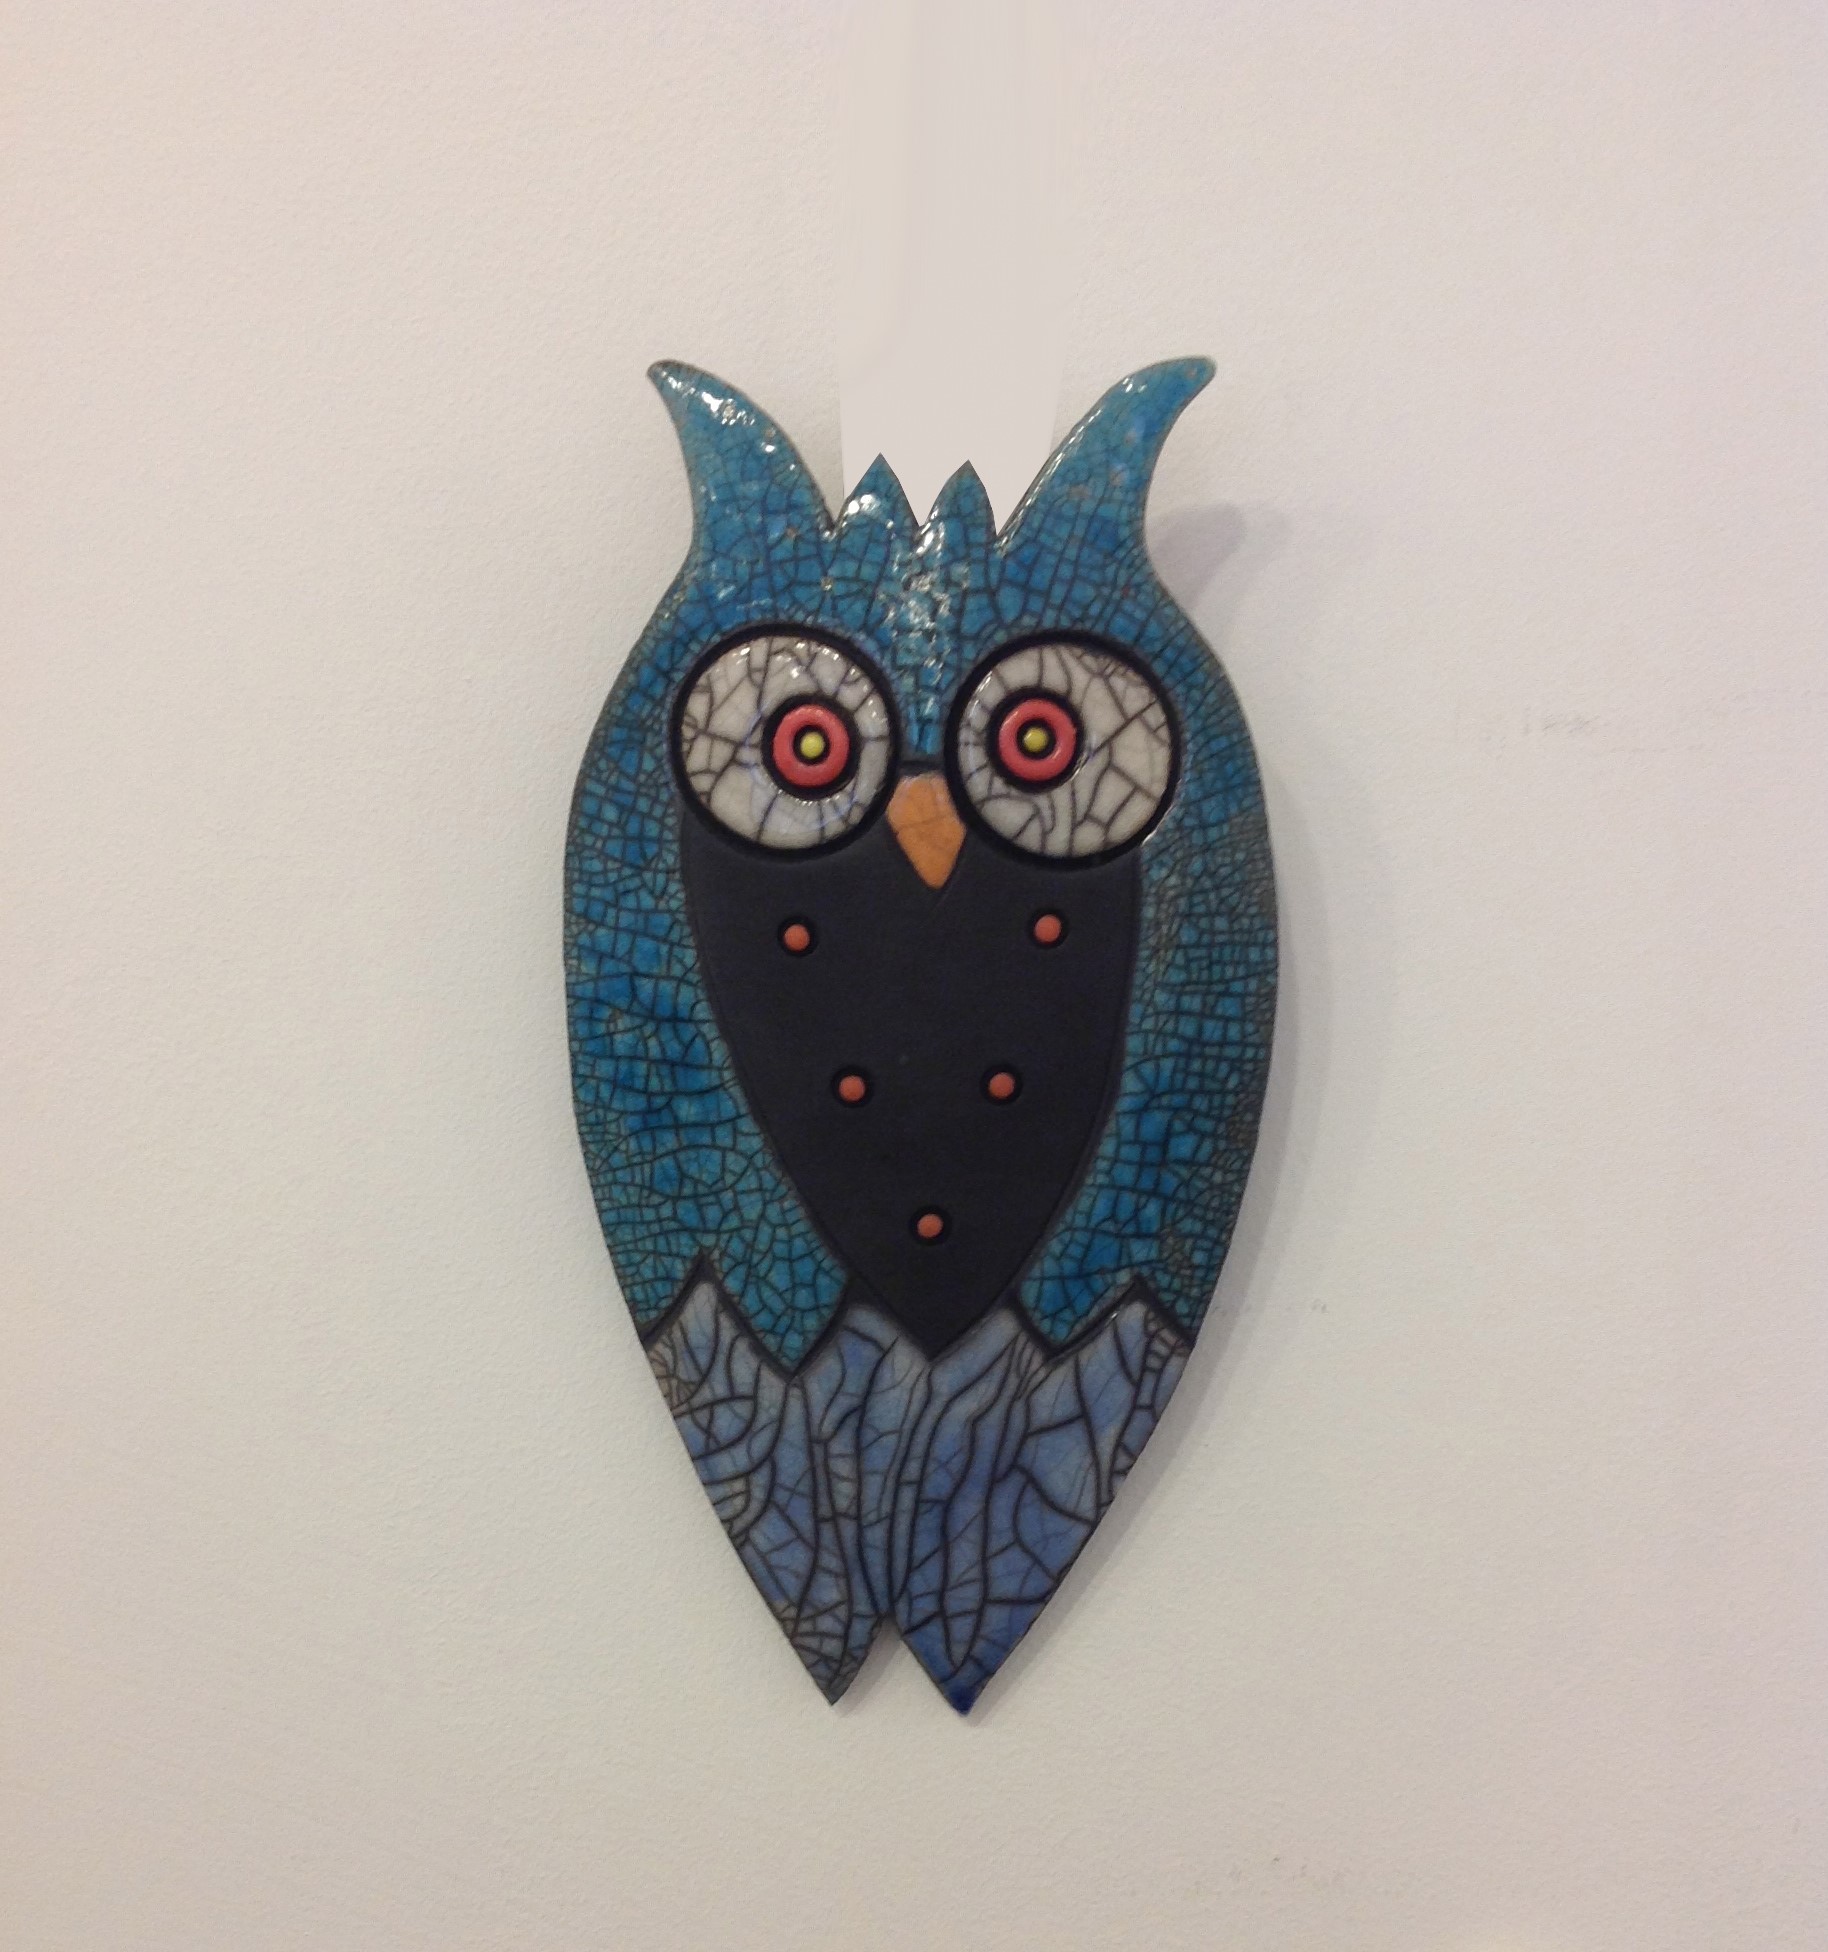 'Large Owl I' by artist Julian Smith